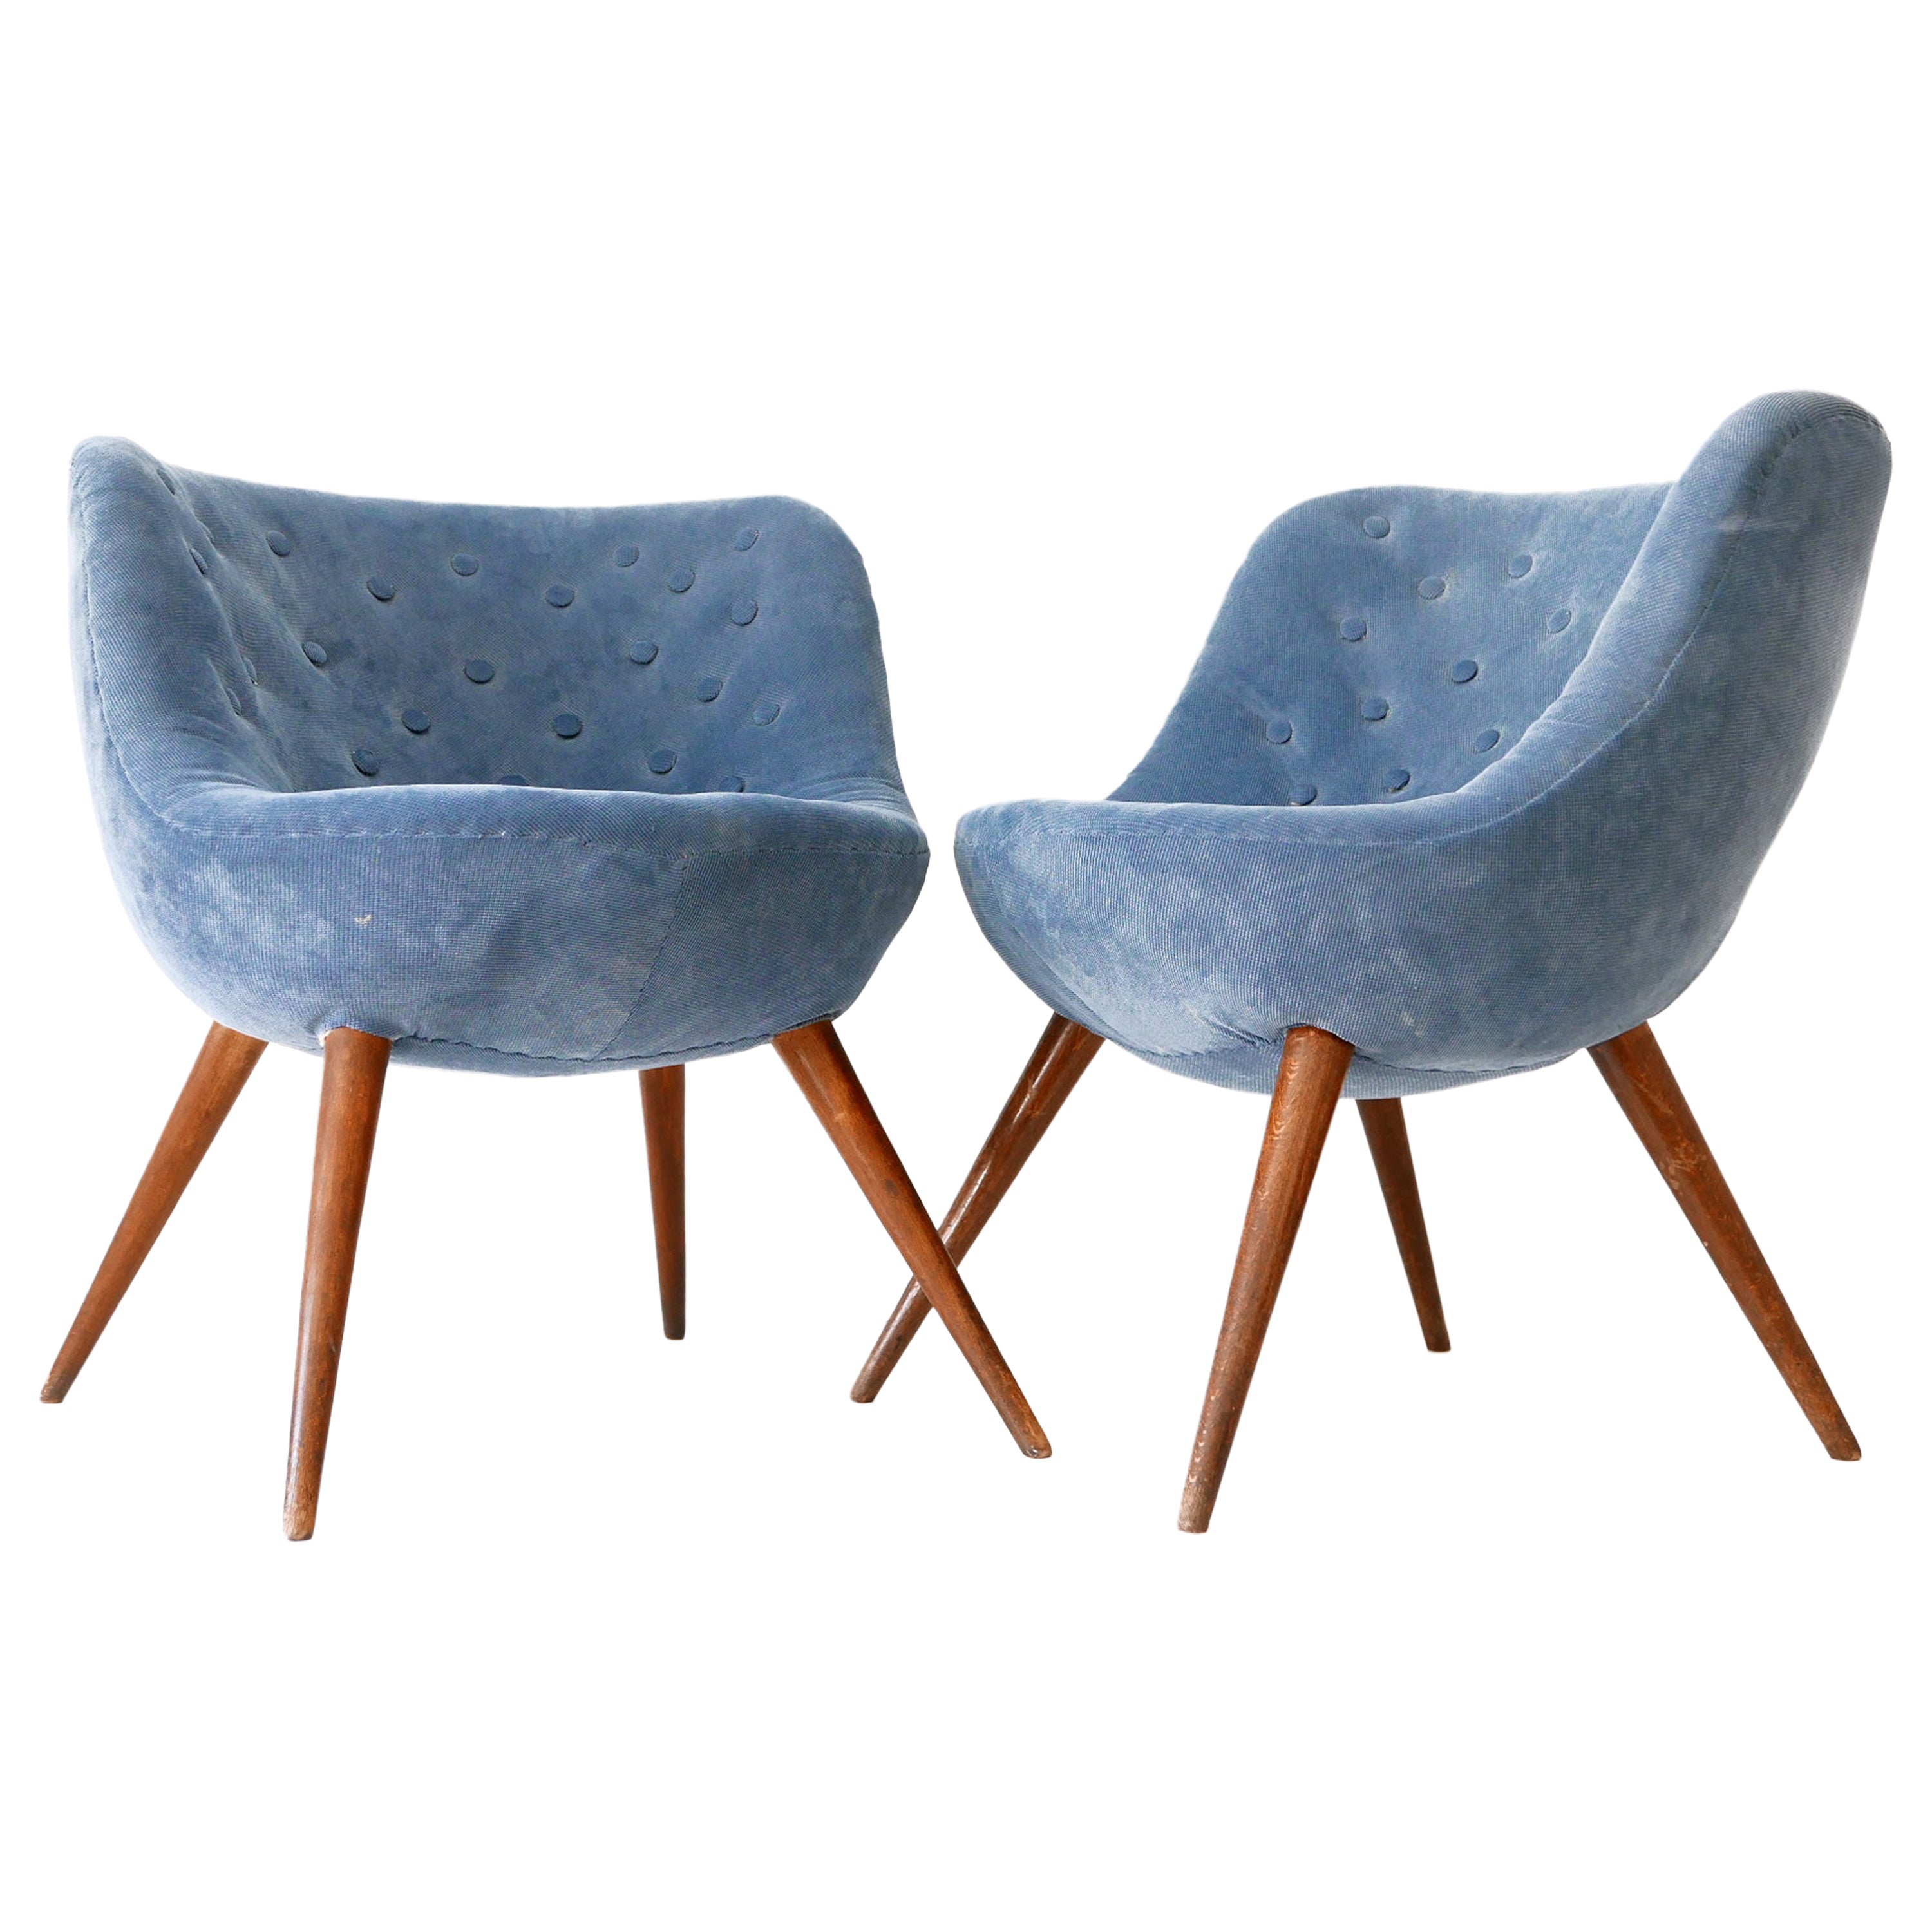 Set of Two Rare Mid-Century Easy Chairs by Fritz Neth for Correcta Germany 1950s For Sale